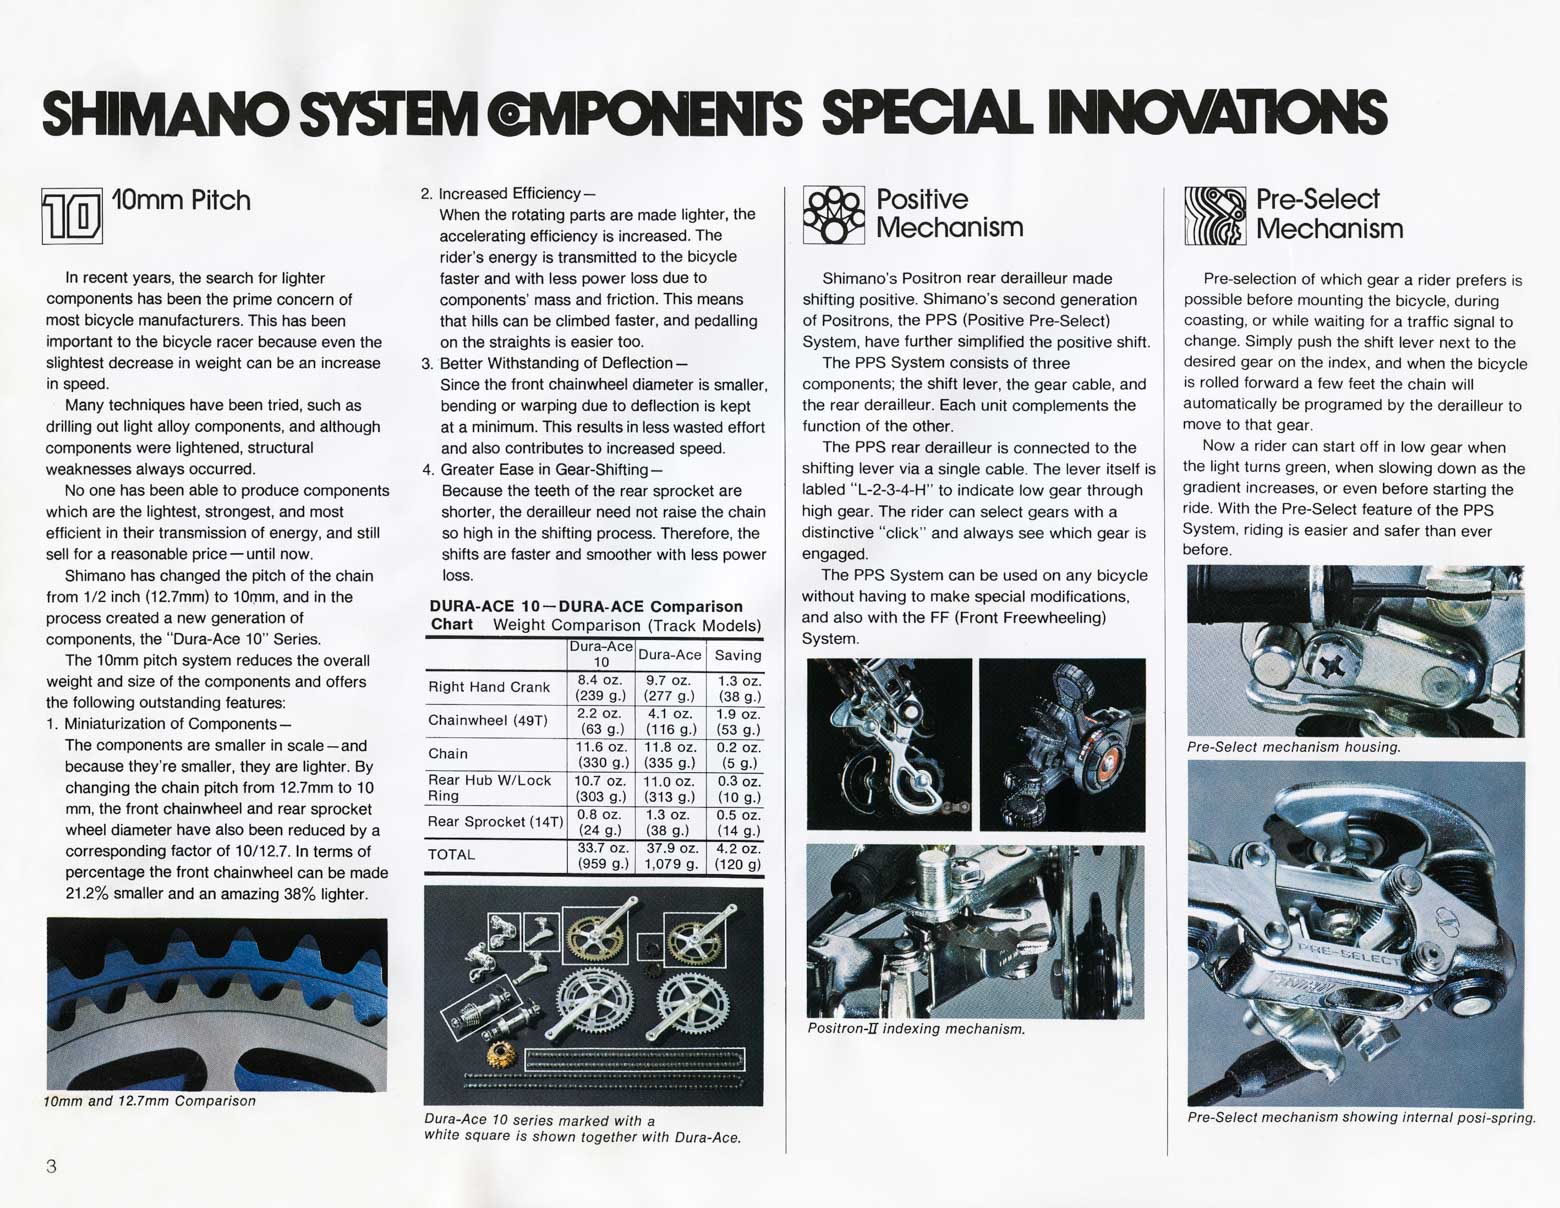 Shimano Bicycle System Components (1977) page 03 main image